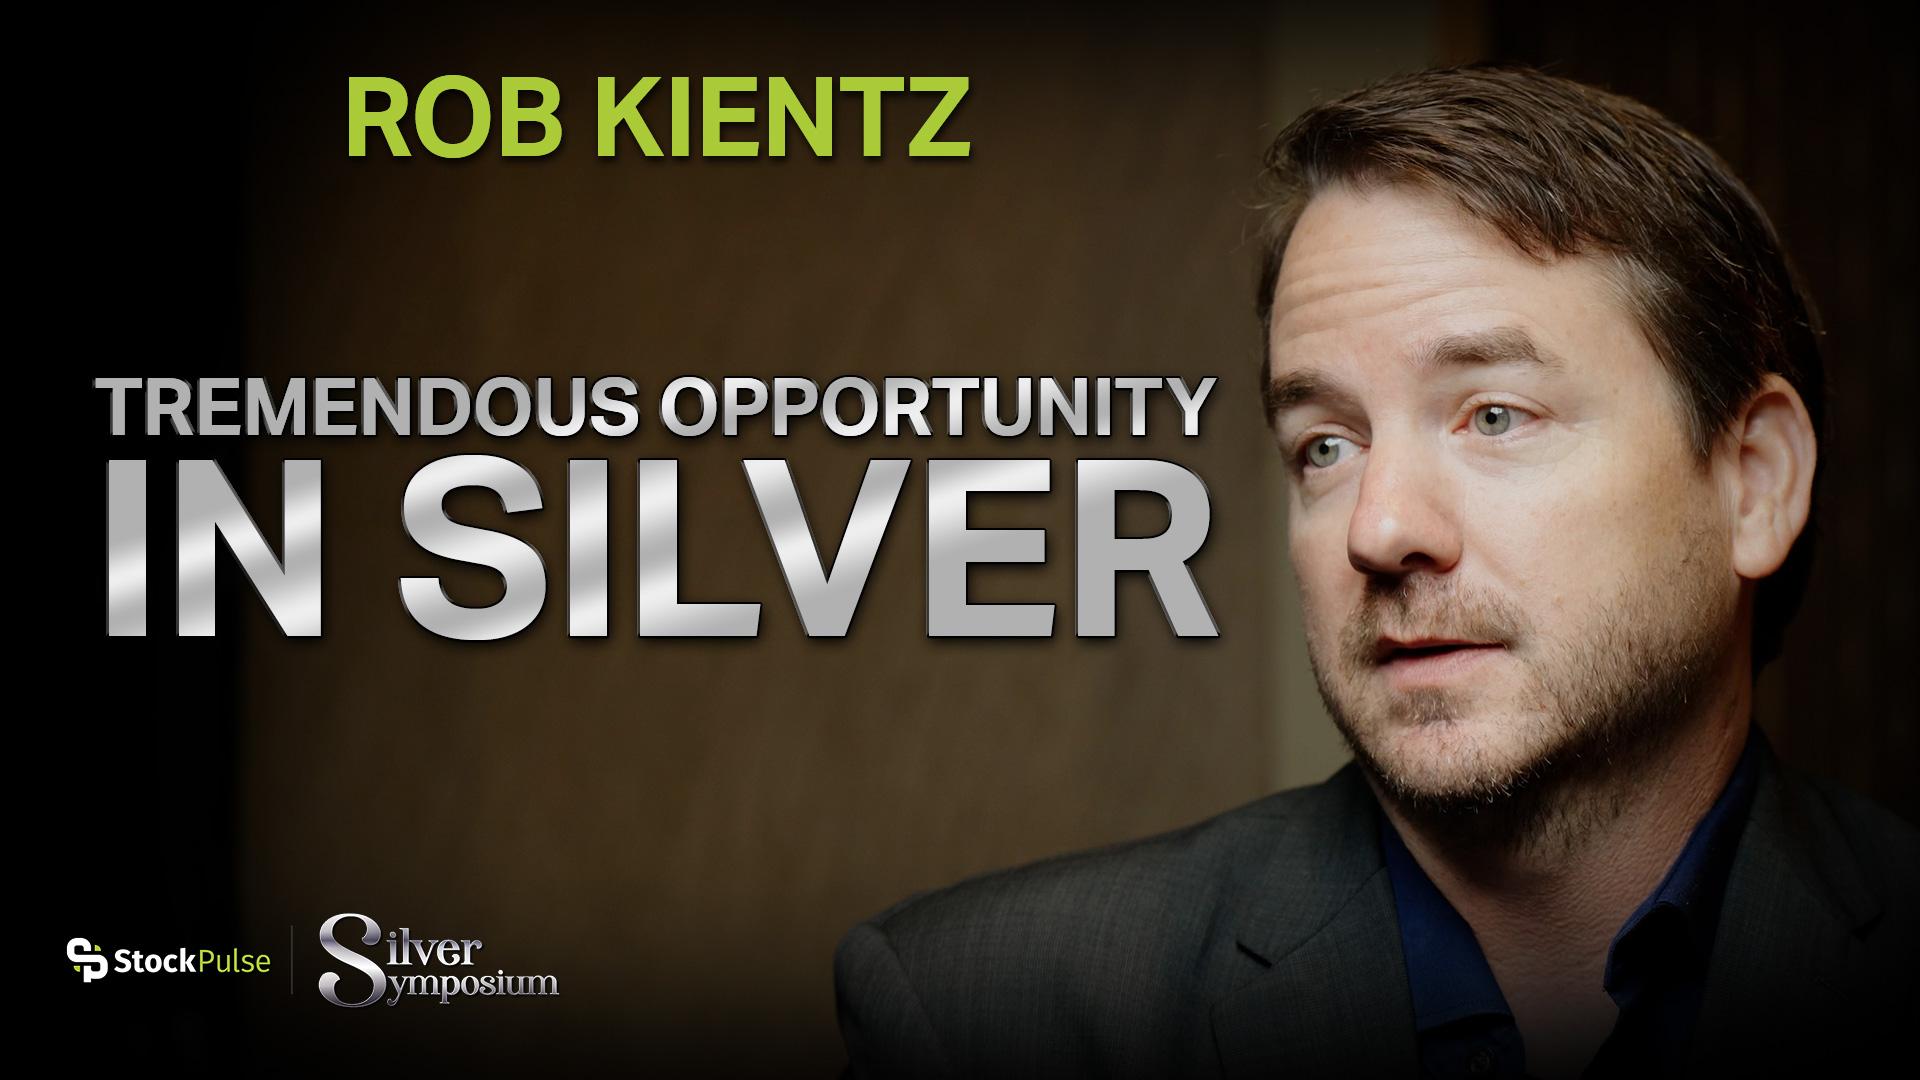 Rob Kientz: There’s a Tremendous Opportunity in Silver